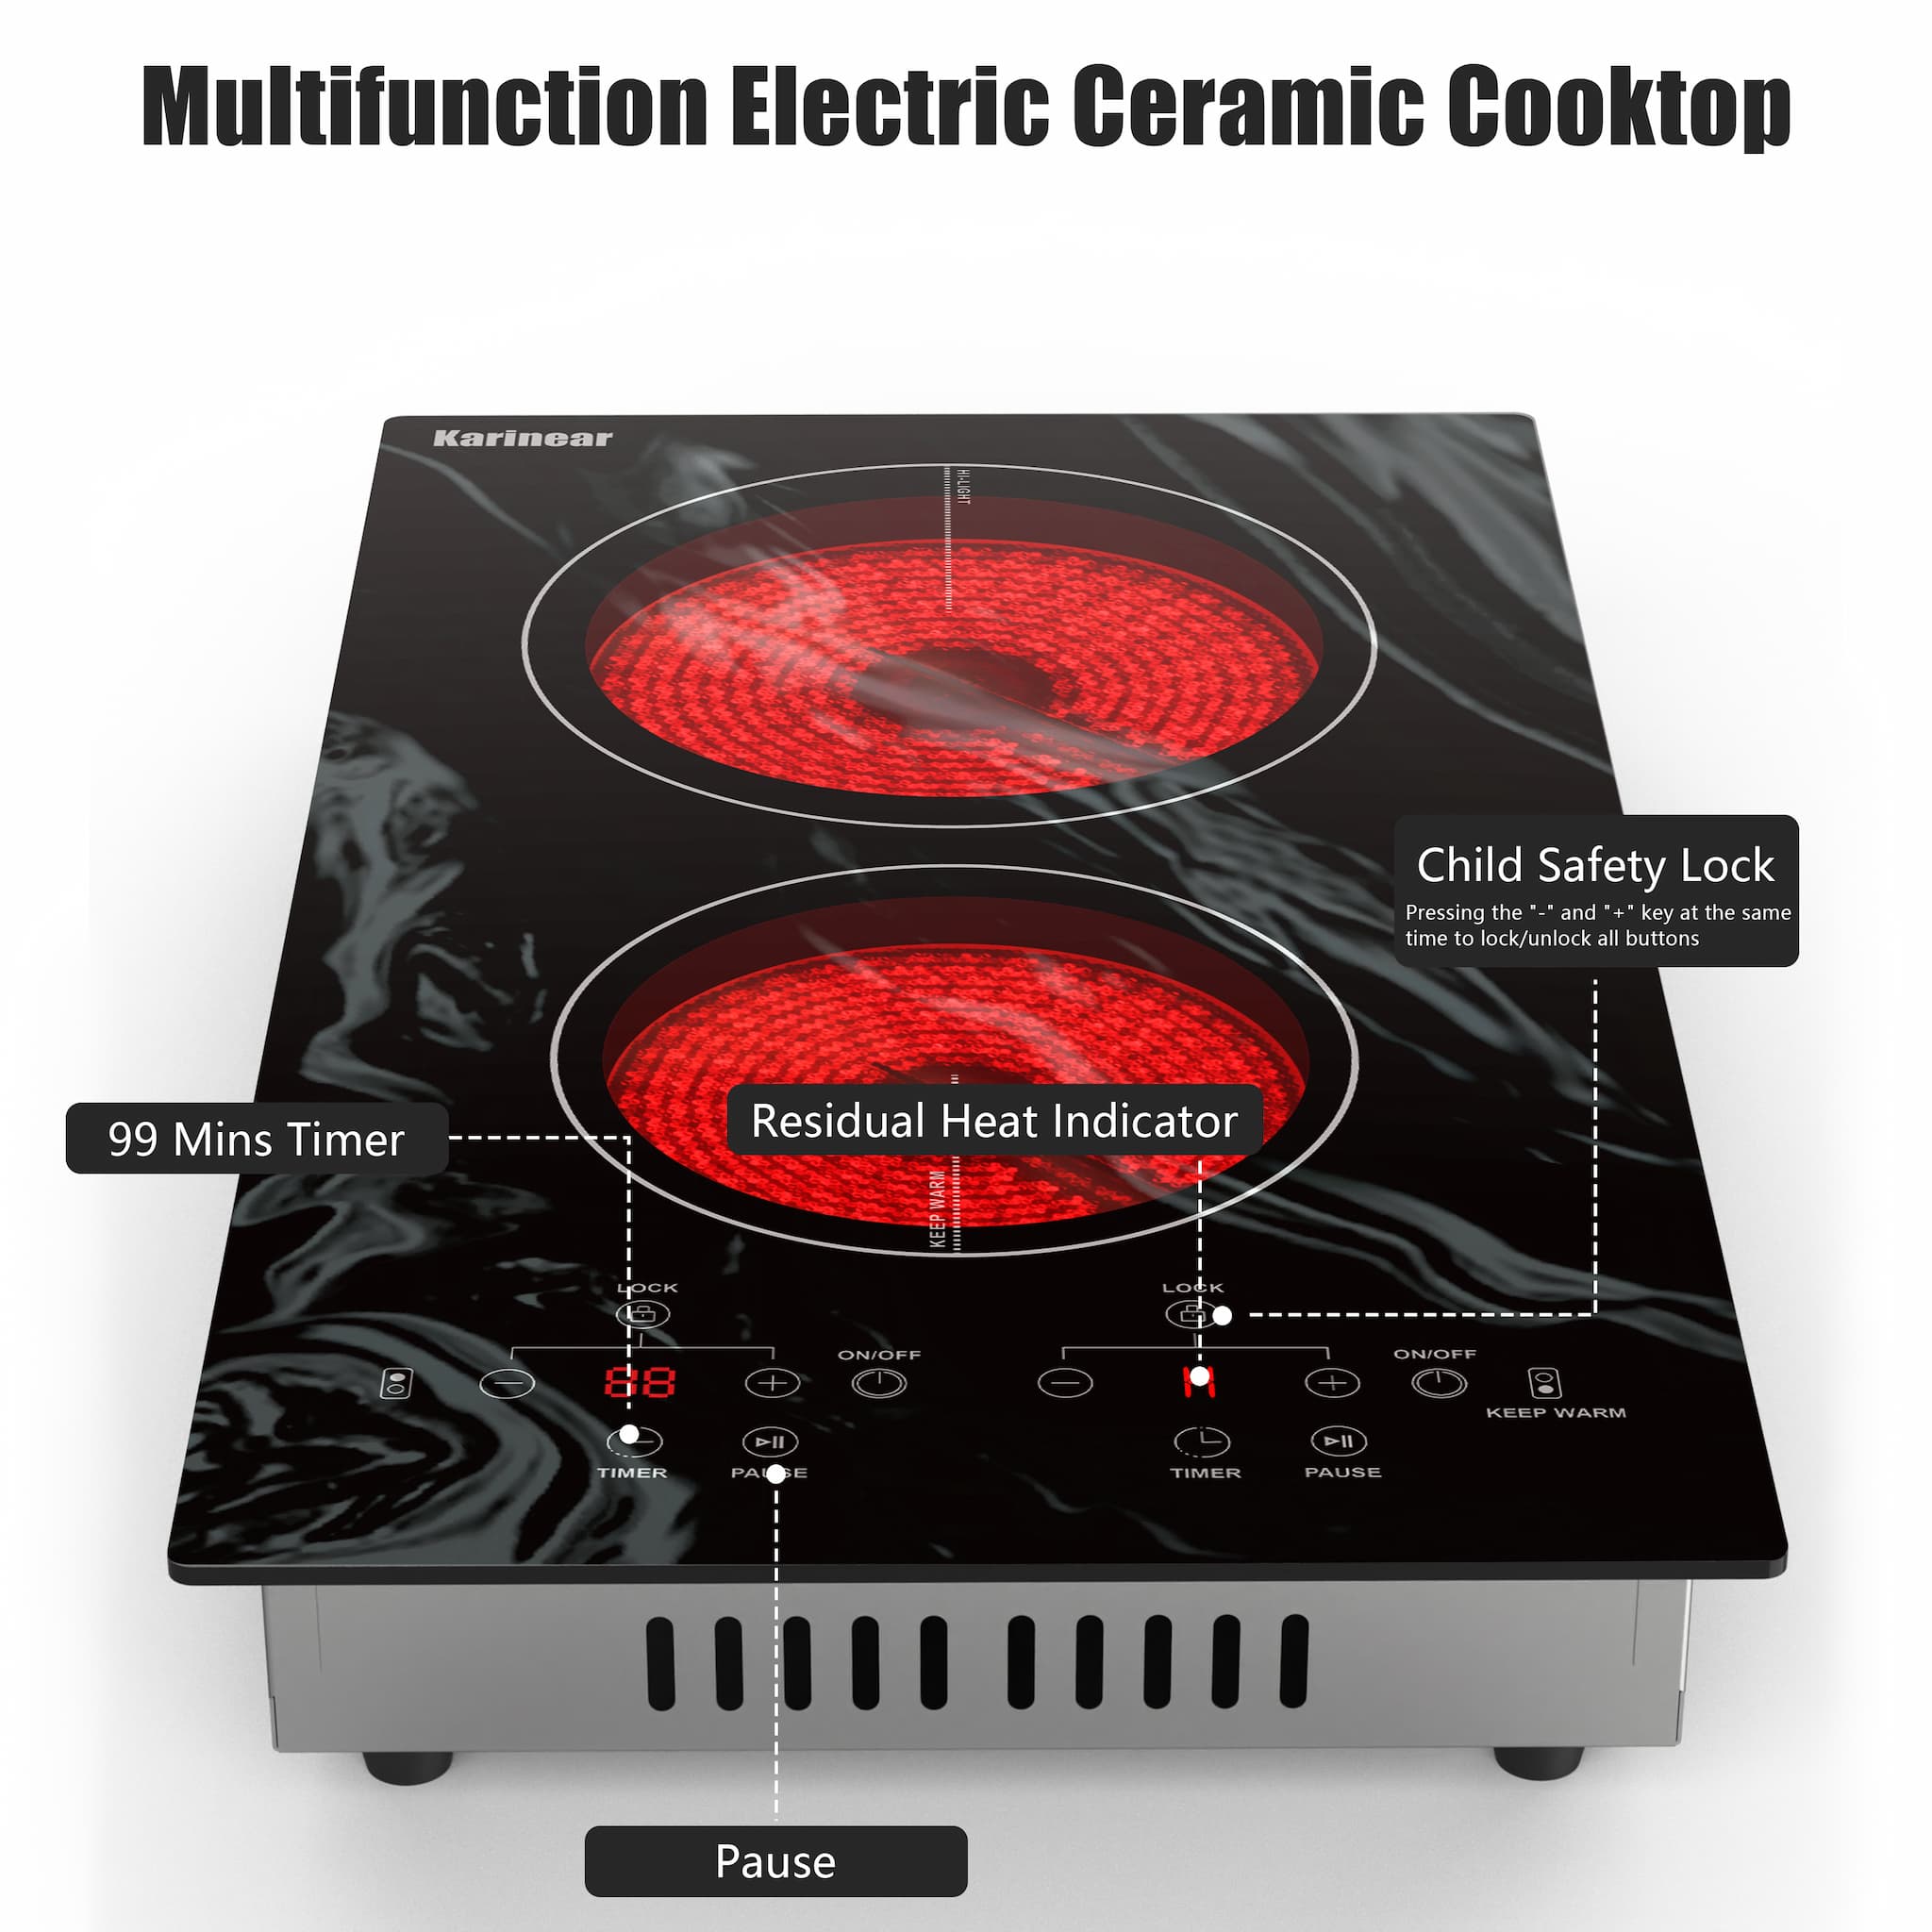 Induction vs. Electric Radiant Cooktops